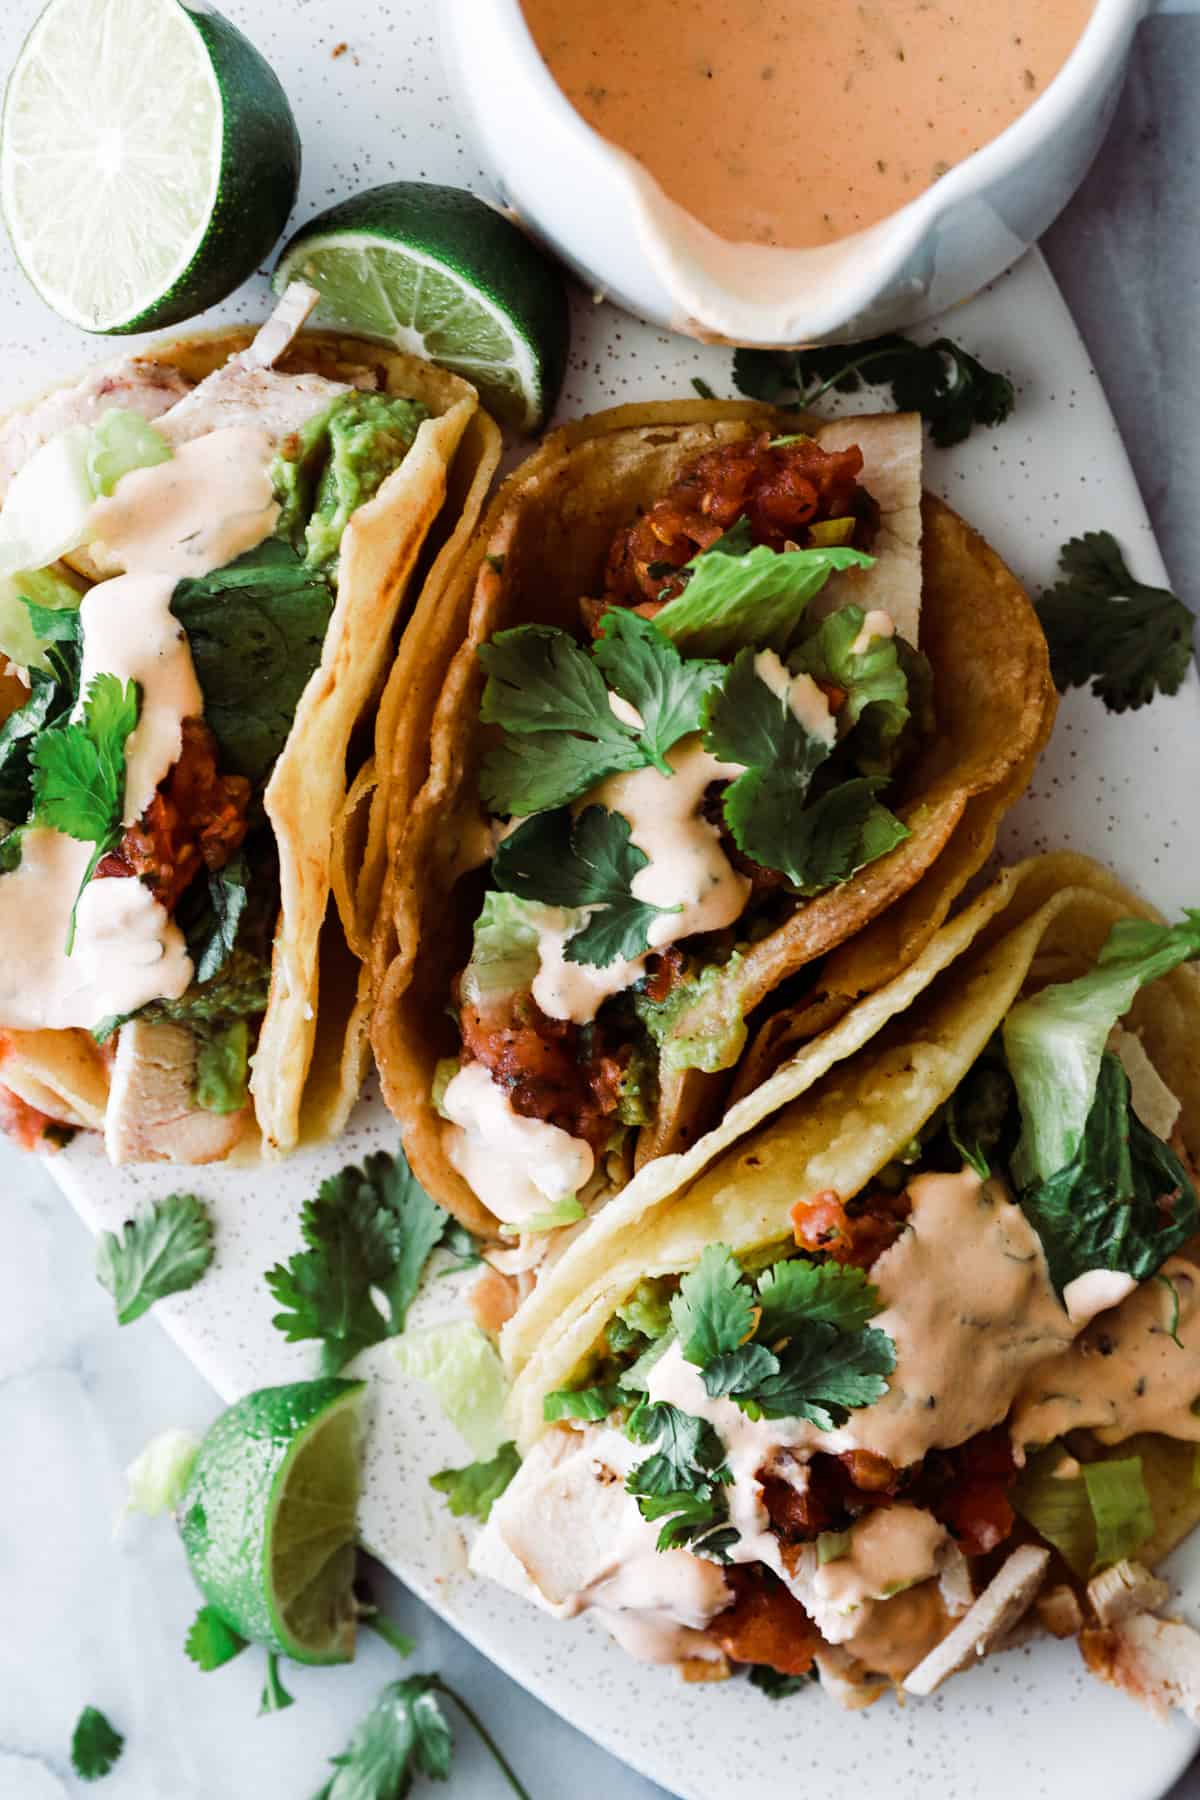 Homemade tacos with chipotle cream sauce, bacon and lime